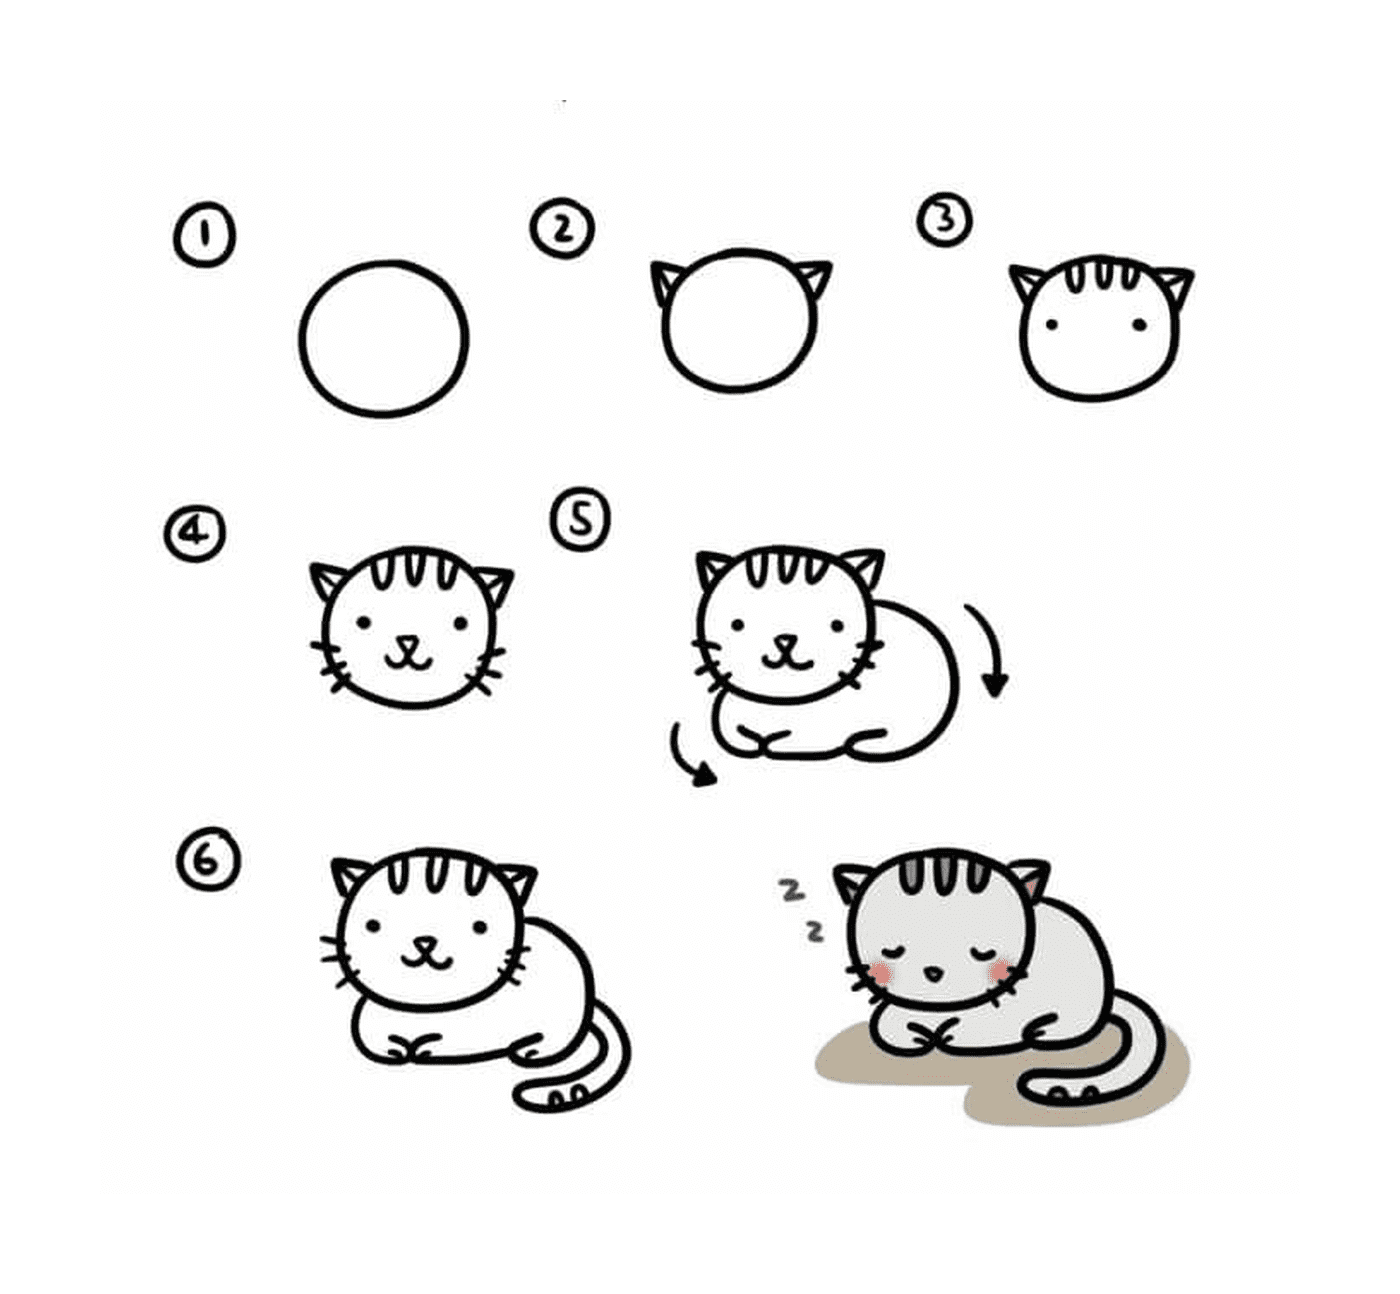  How to draw a cat step by step 